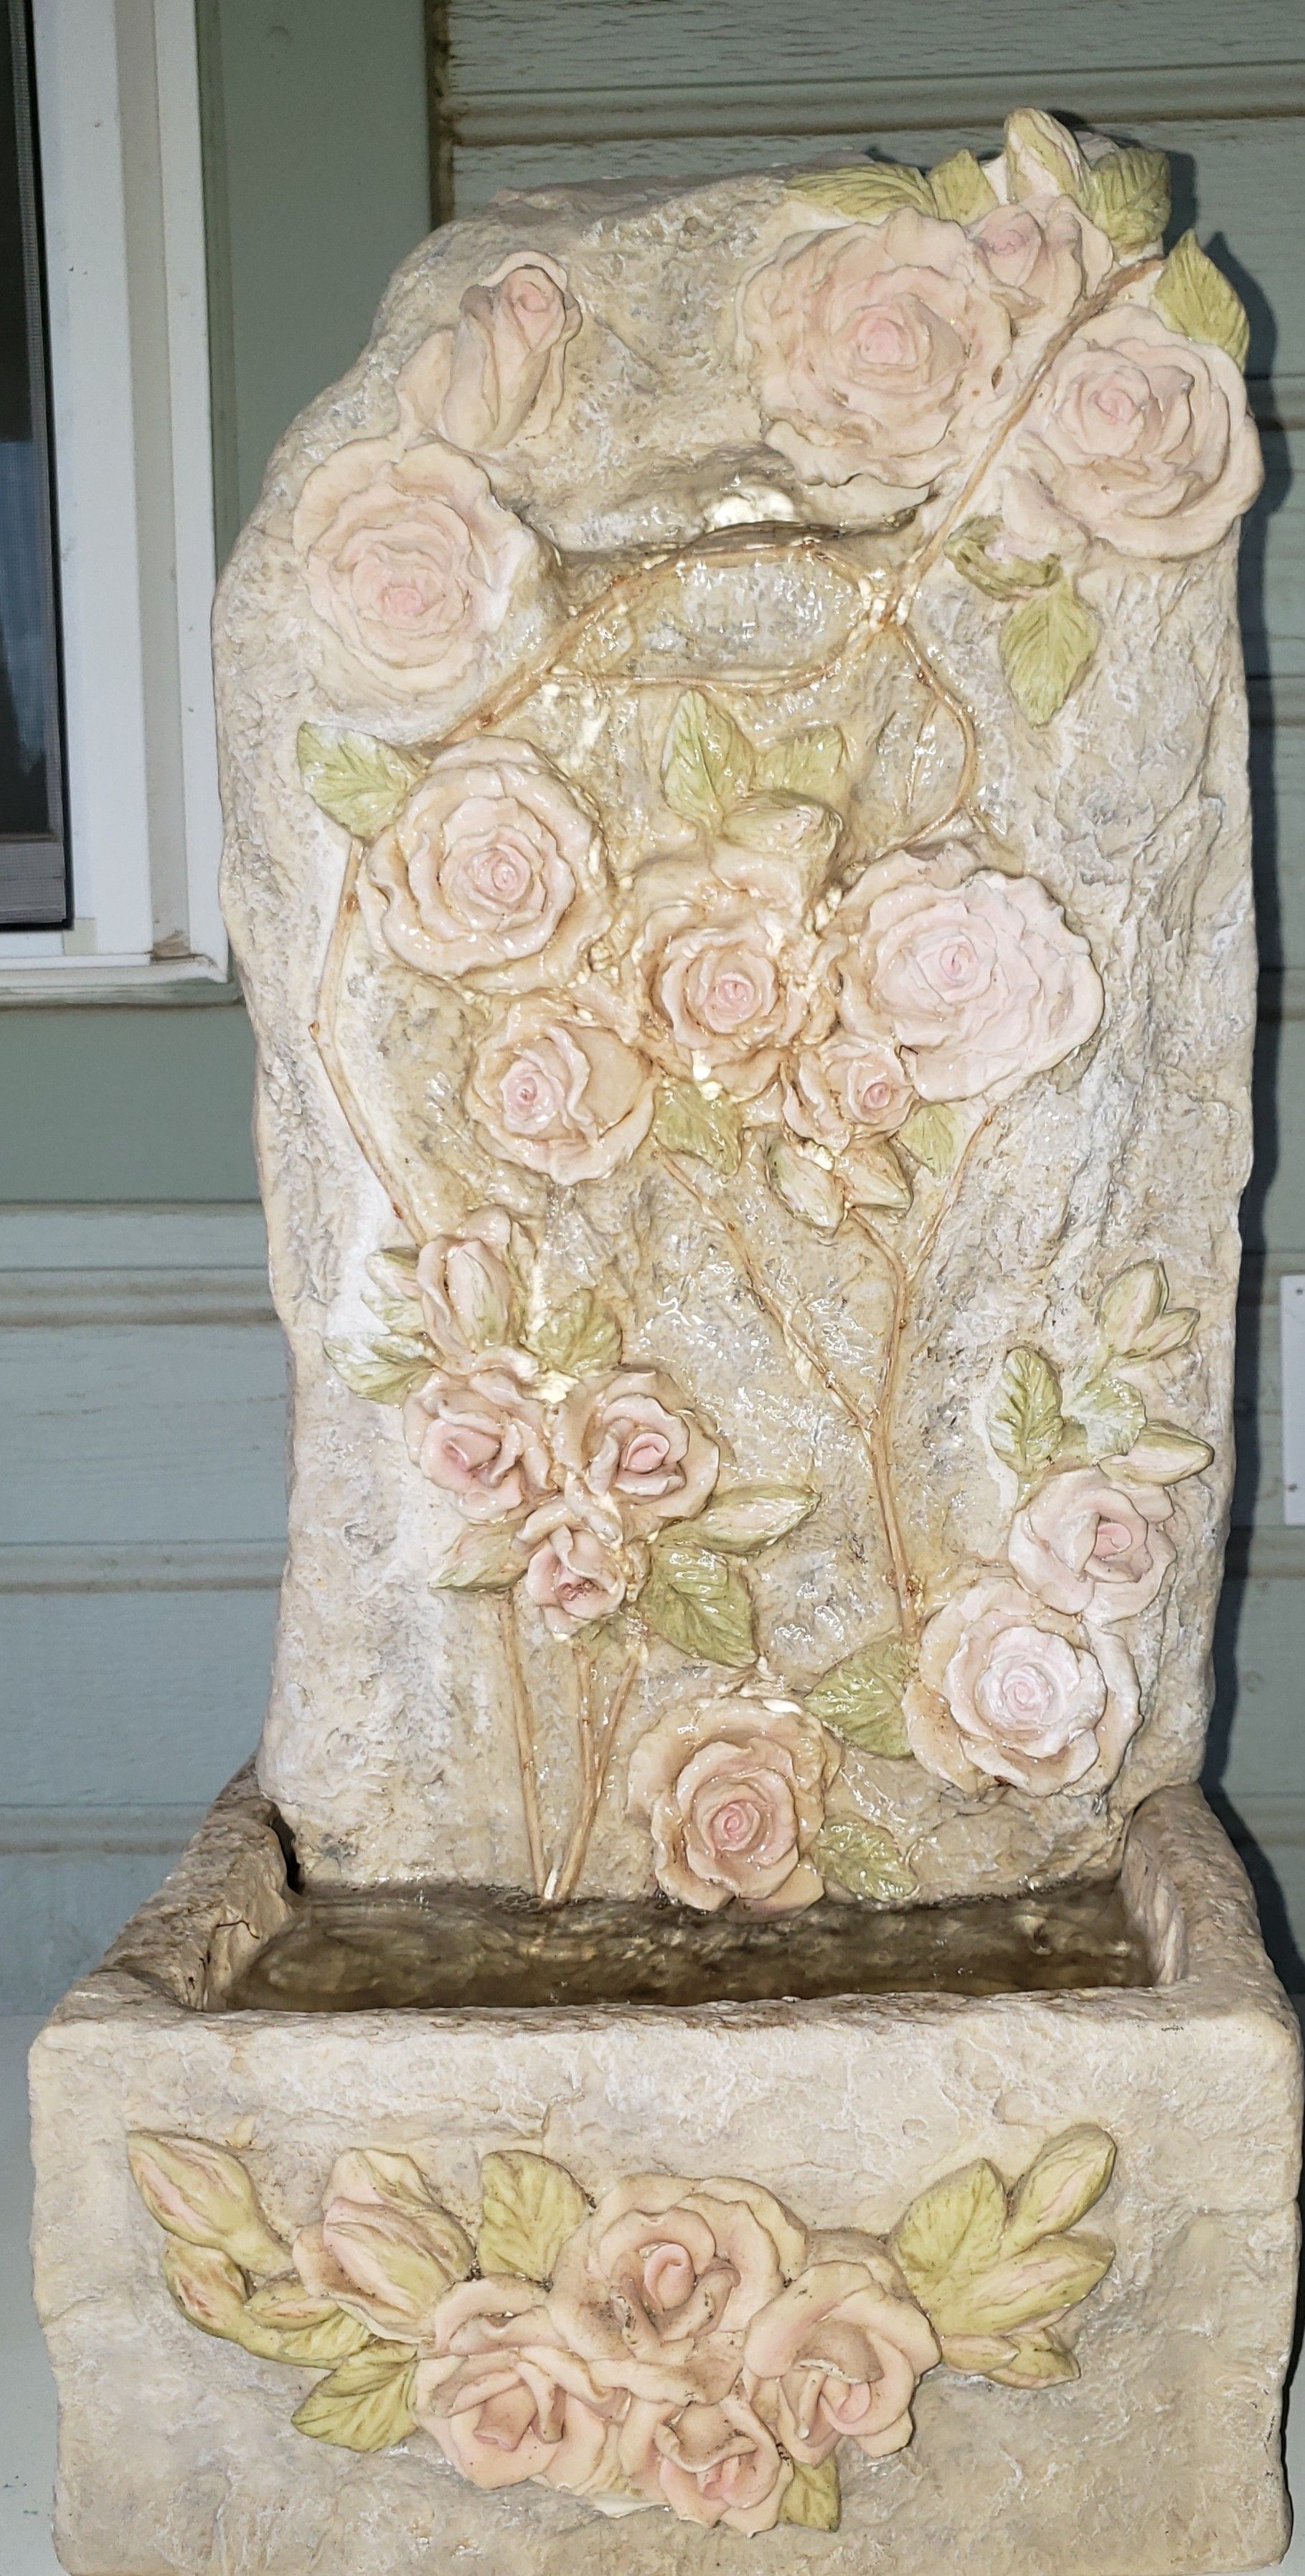 Rose Tabletop Fountain